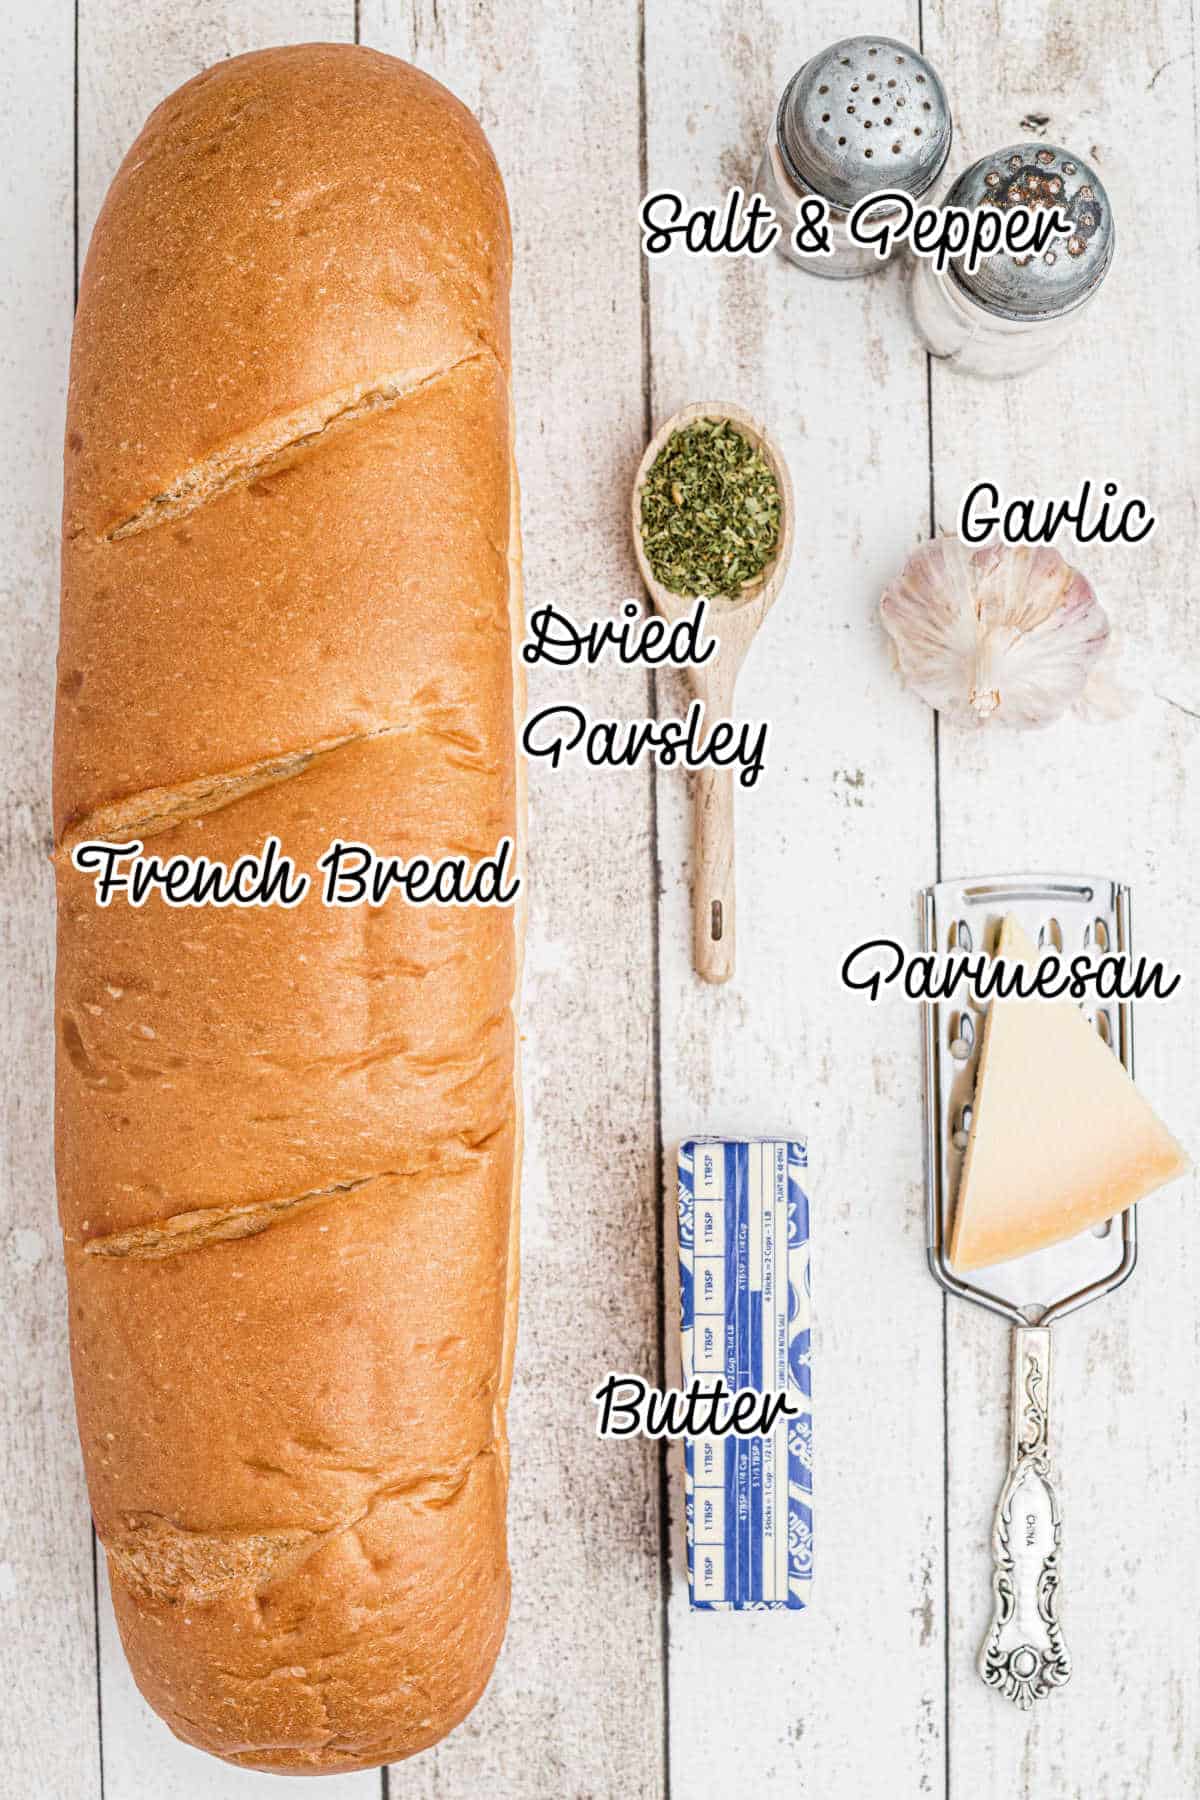 Stuffed garlic bread ingredients laid out with text overlay.